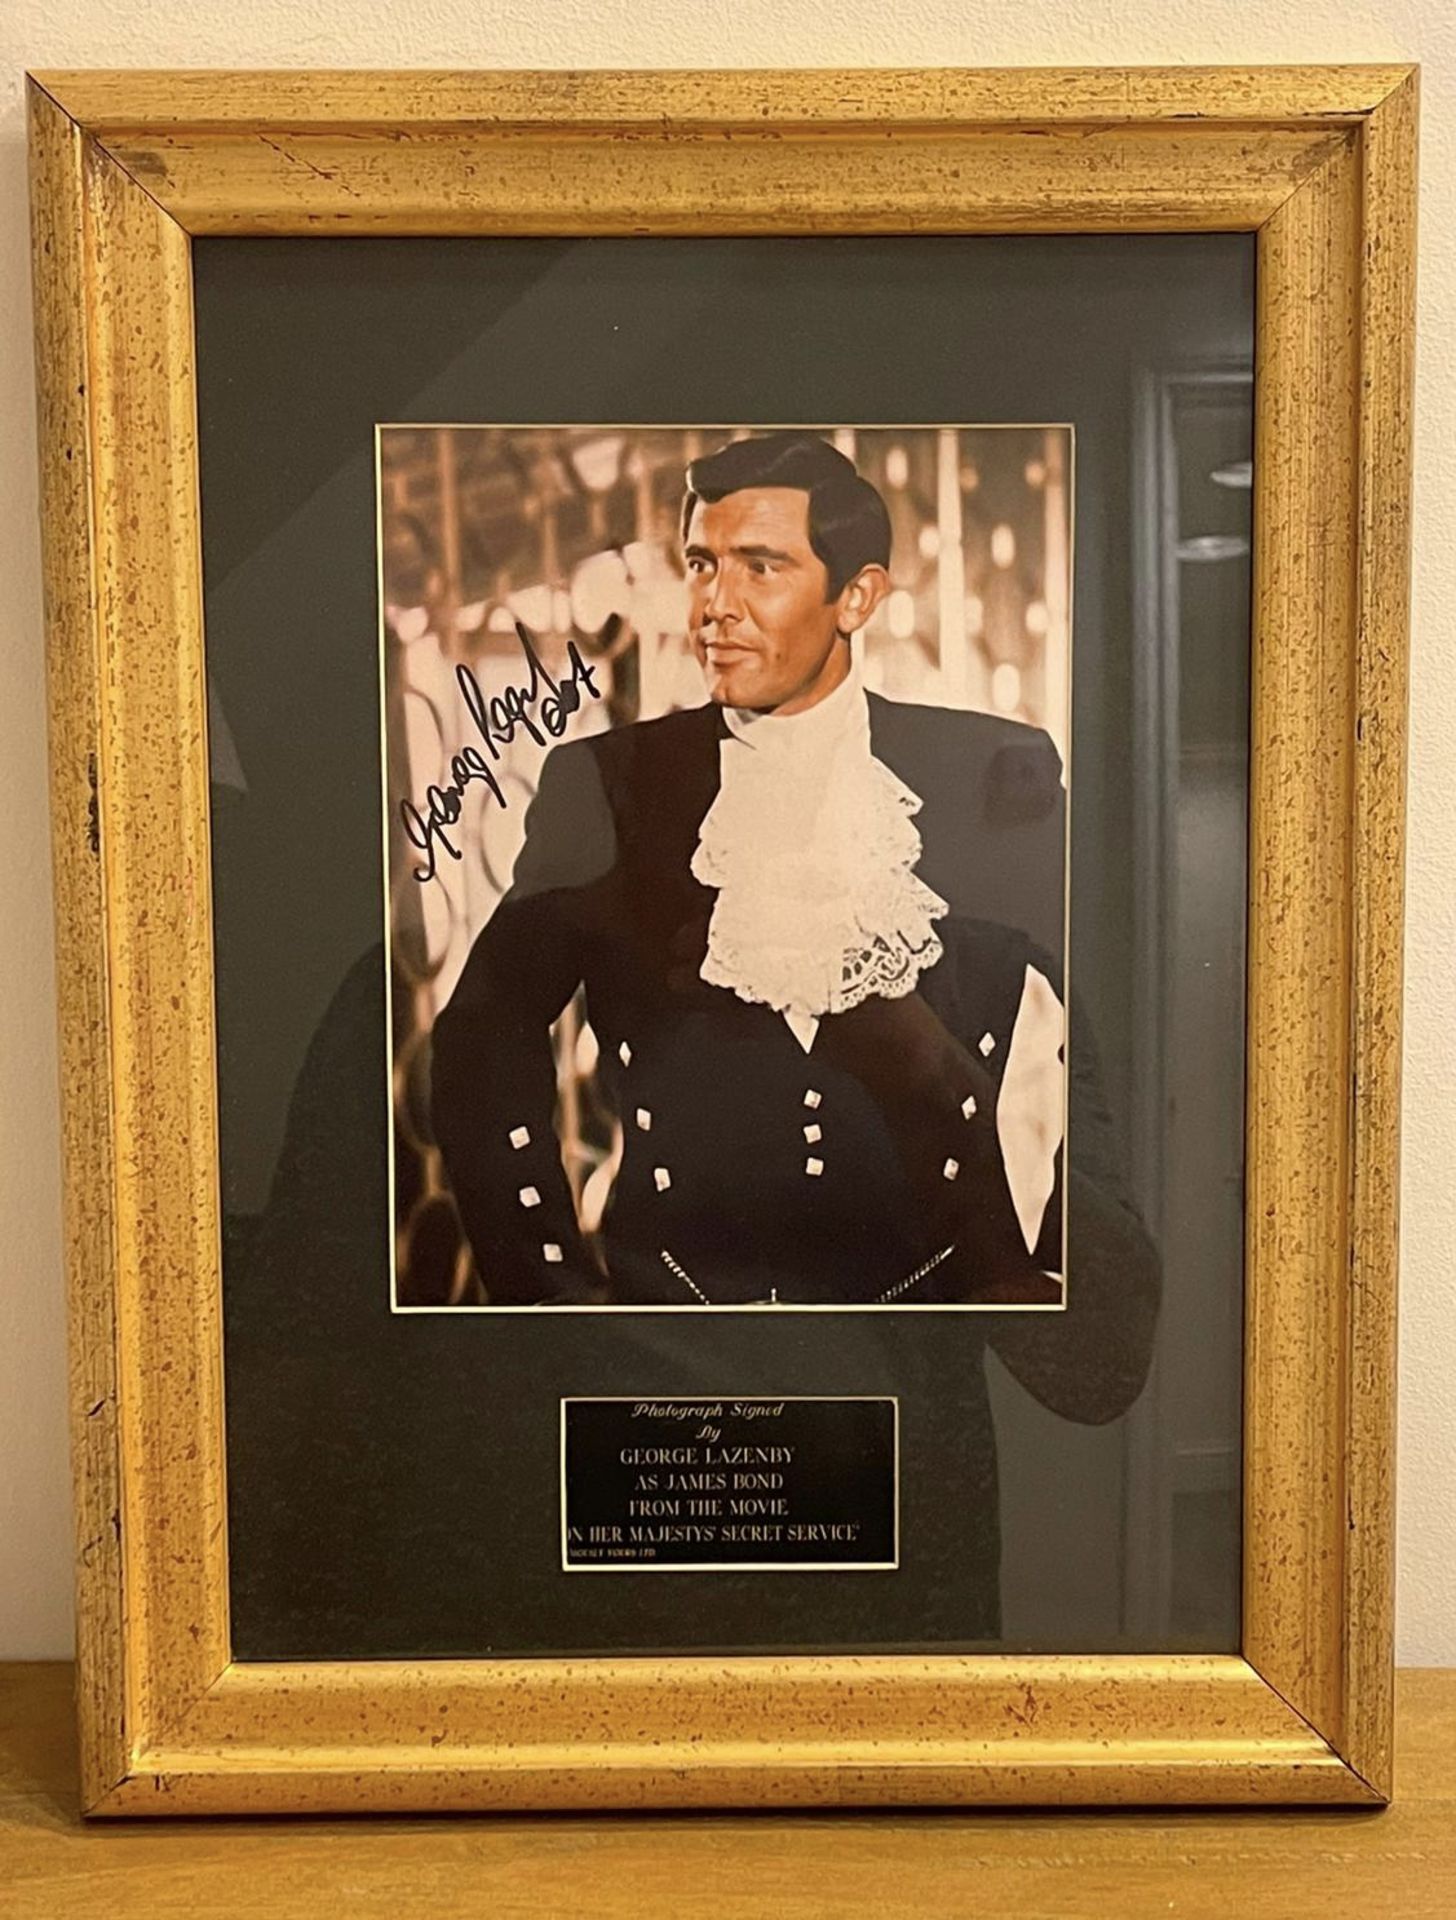 HAND SIGNED framed photograph of 'George Lazenby' as James Bond with COA